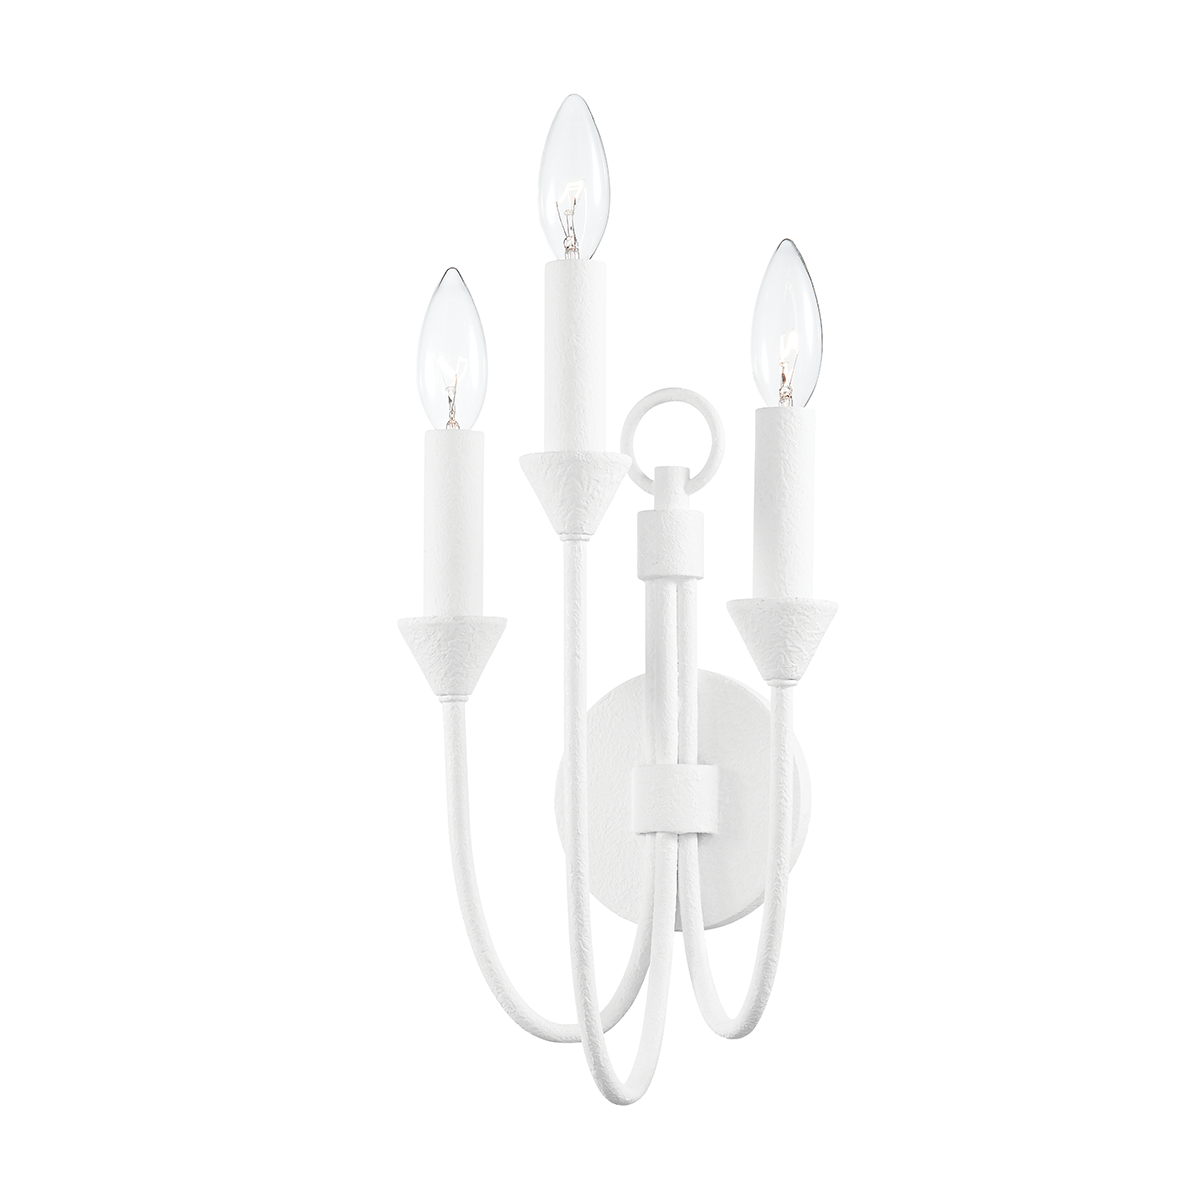 Troy Lighting Cate Wall Sconce Wall Sconce Troy Lighting GESSO WHITE 7.75x7.75x17.5 